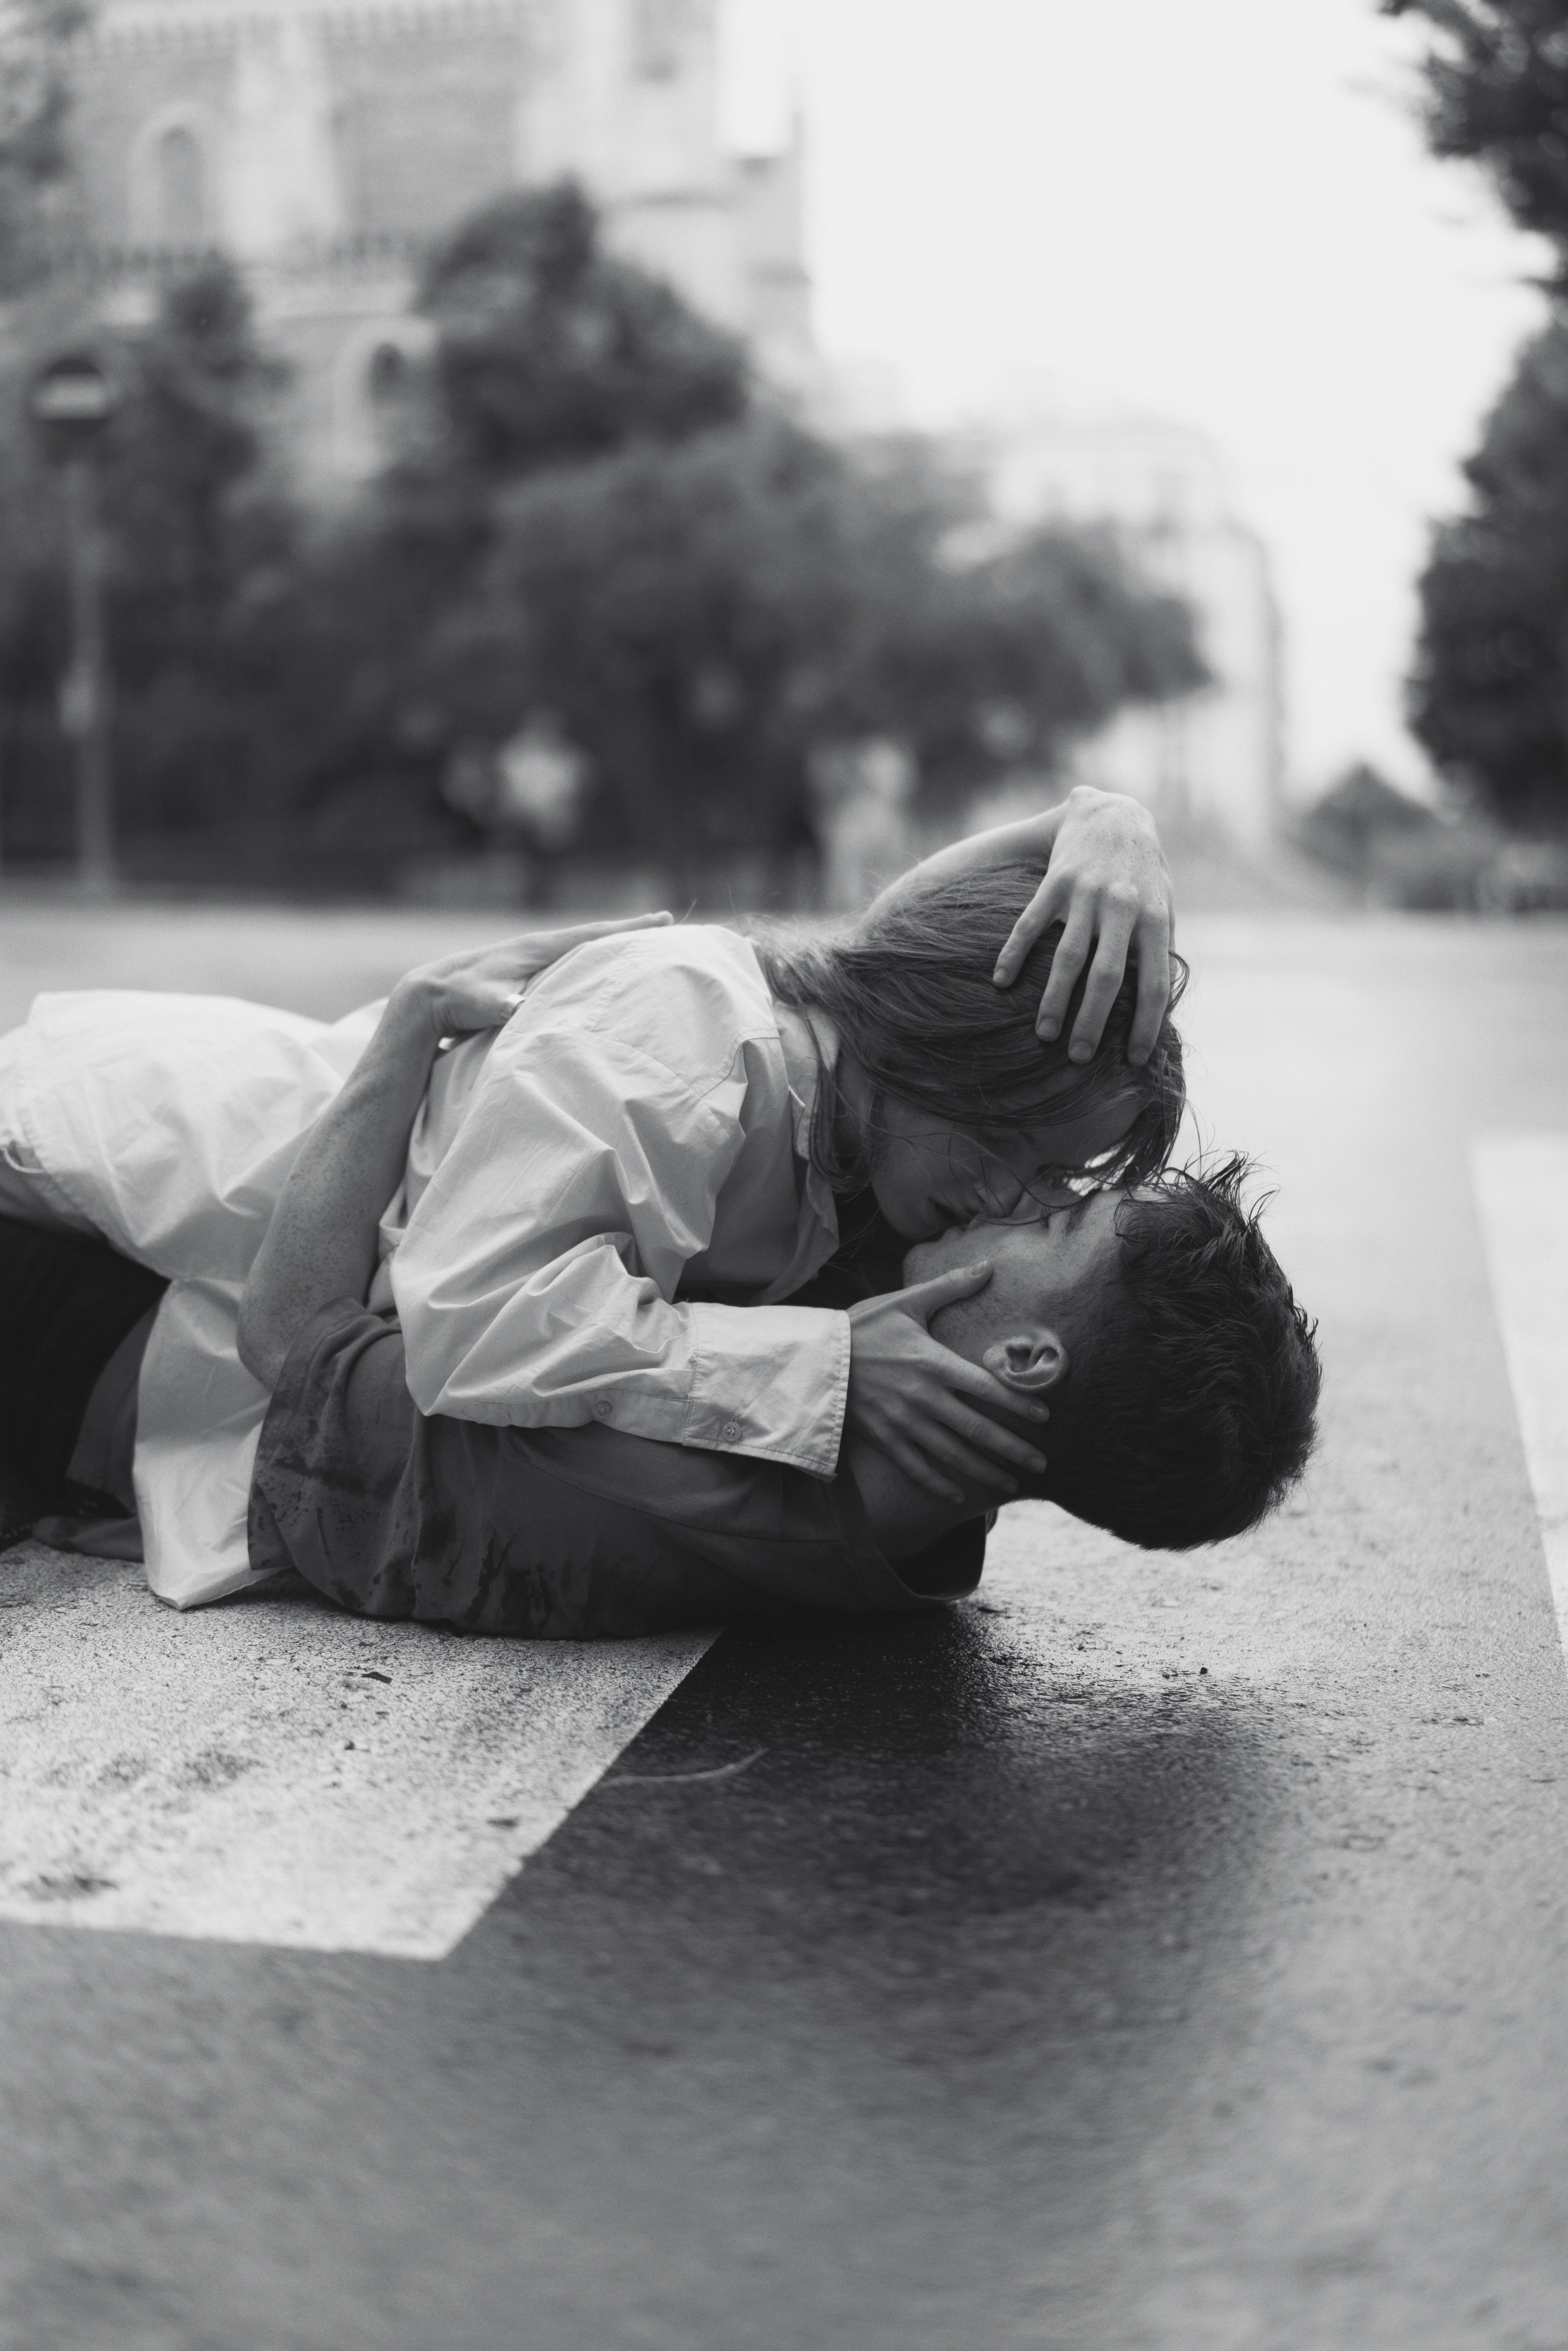 A couple kissing while lying down on the road. | Source: Pexels